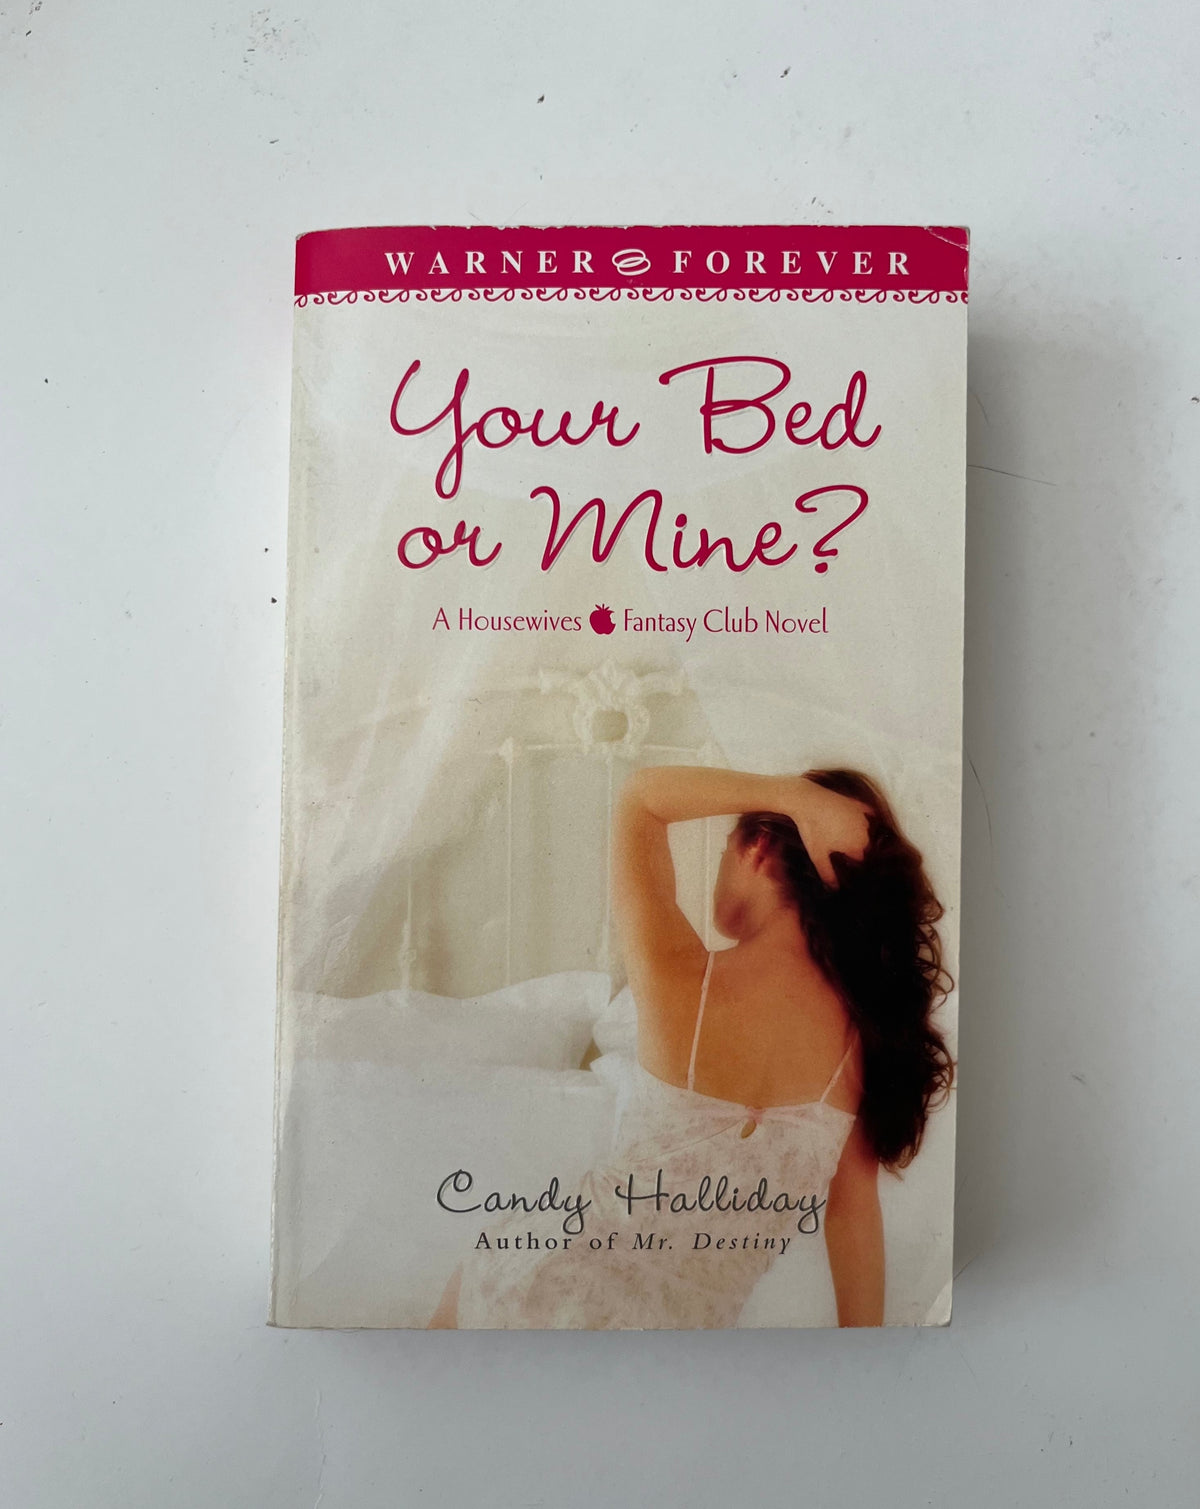 Donate: Your Bed or Mine? by Candy Halliday